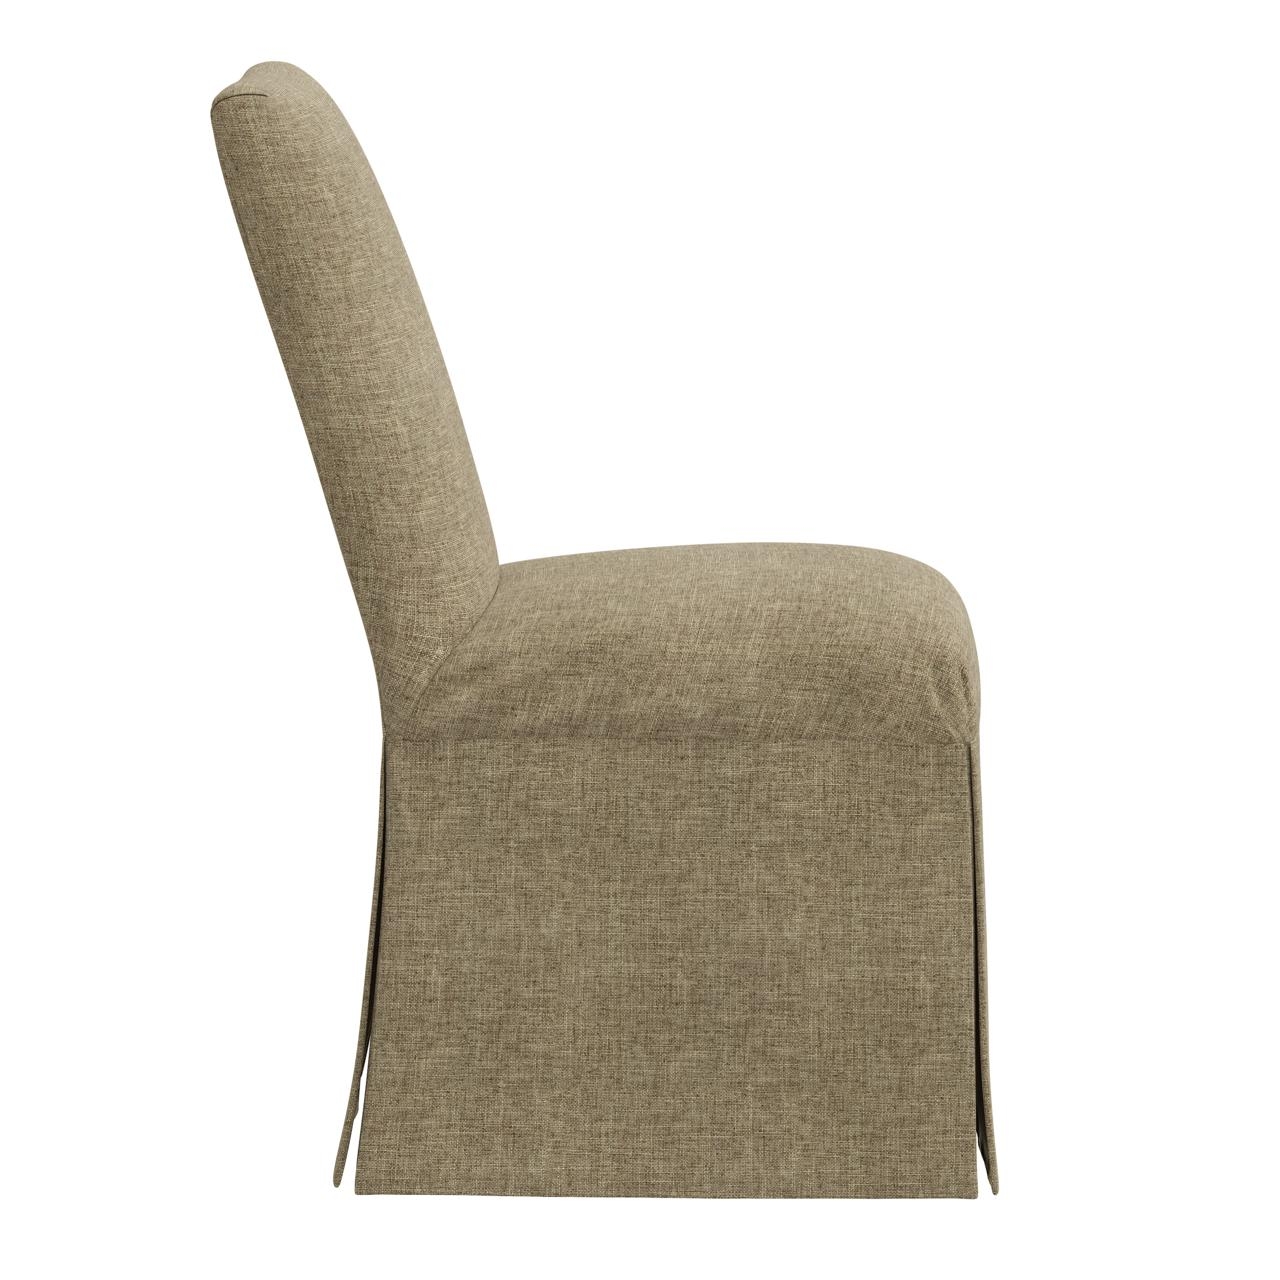 Alice Slipcover Dining Chair in Zuma Linen - Image 2